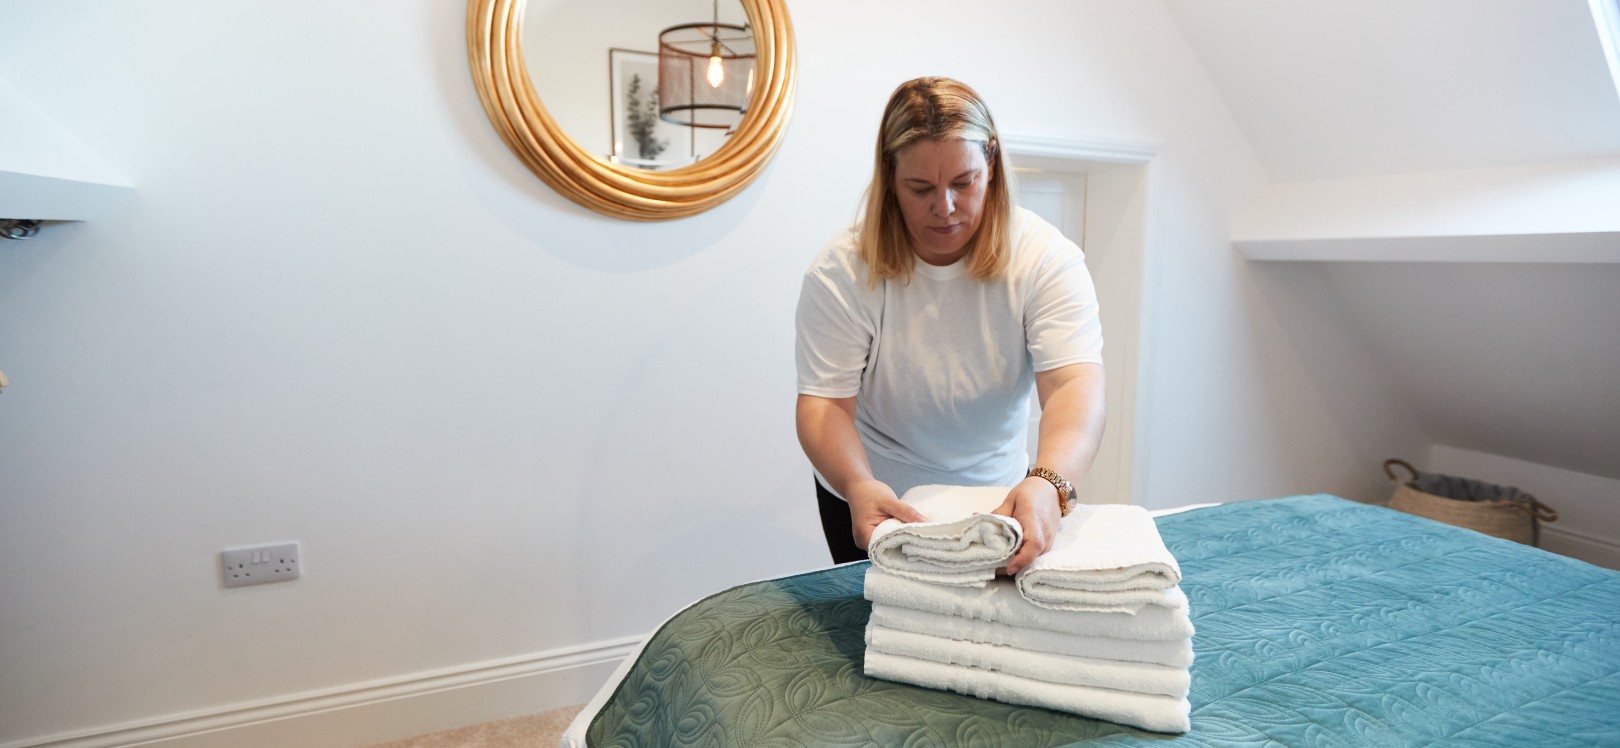 A woman cleaning a bedroomThe Holiday Home Housekeeper